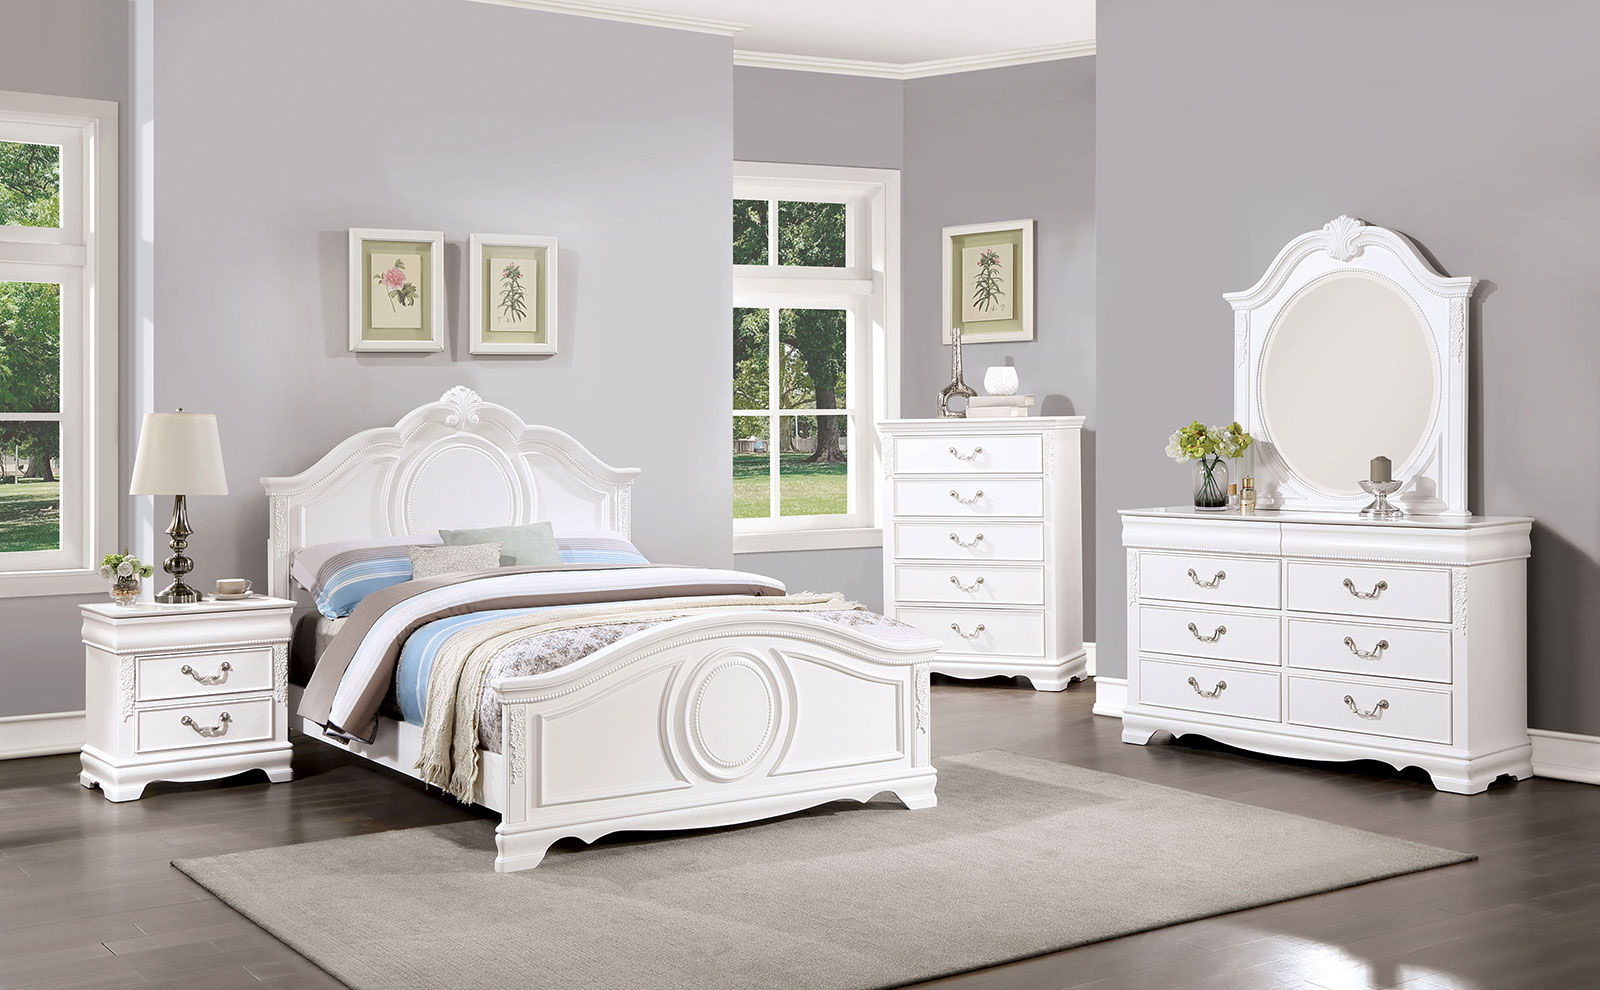 Bedroom Furniture & Related Items